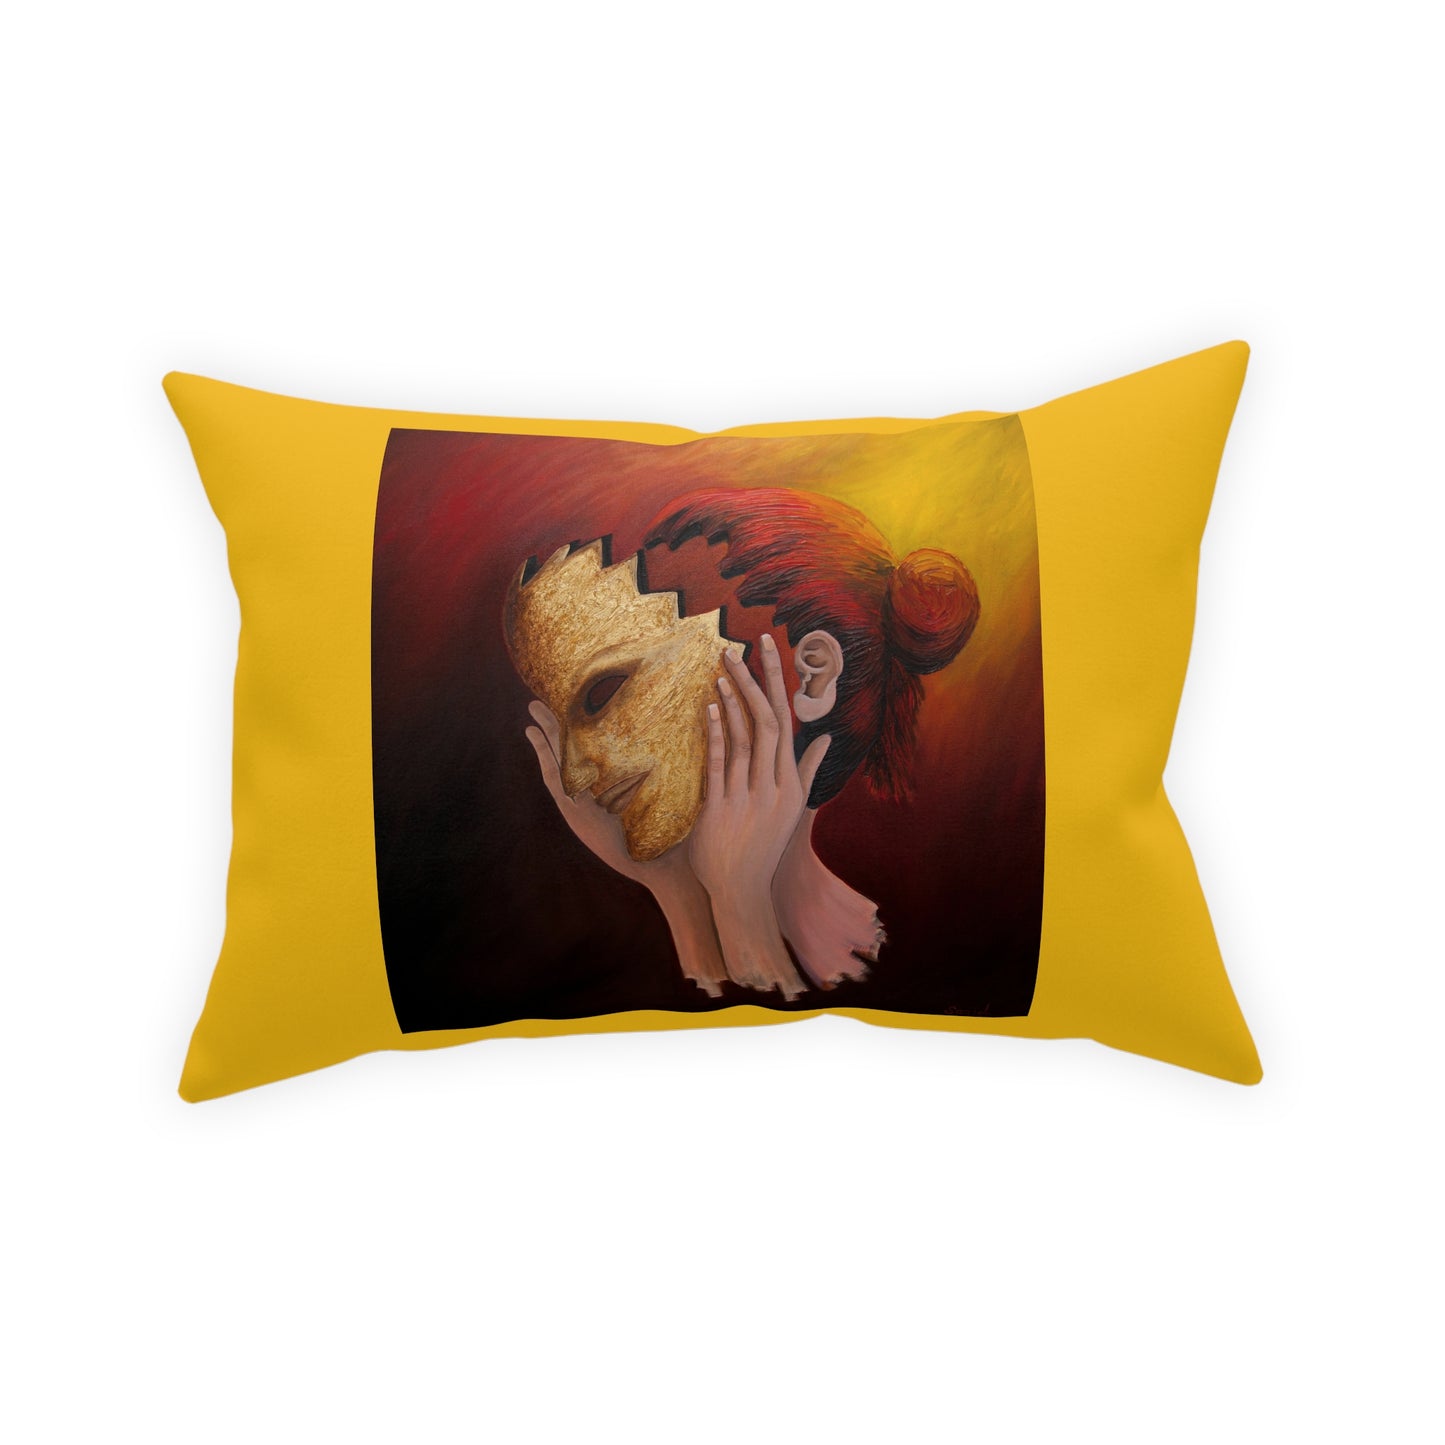 Colorful Throw Pillows - Yellow Throw Pillow - throw pillow for couch - Thoughts